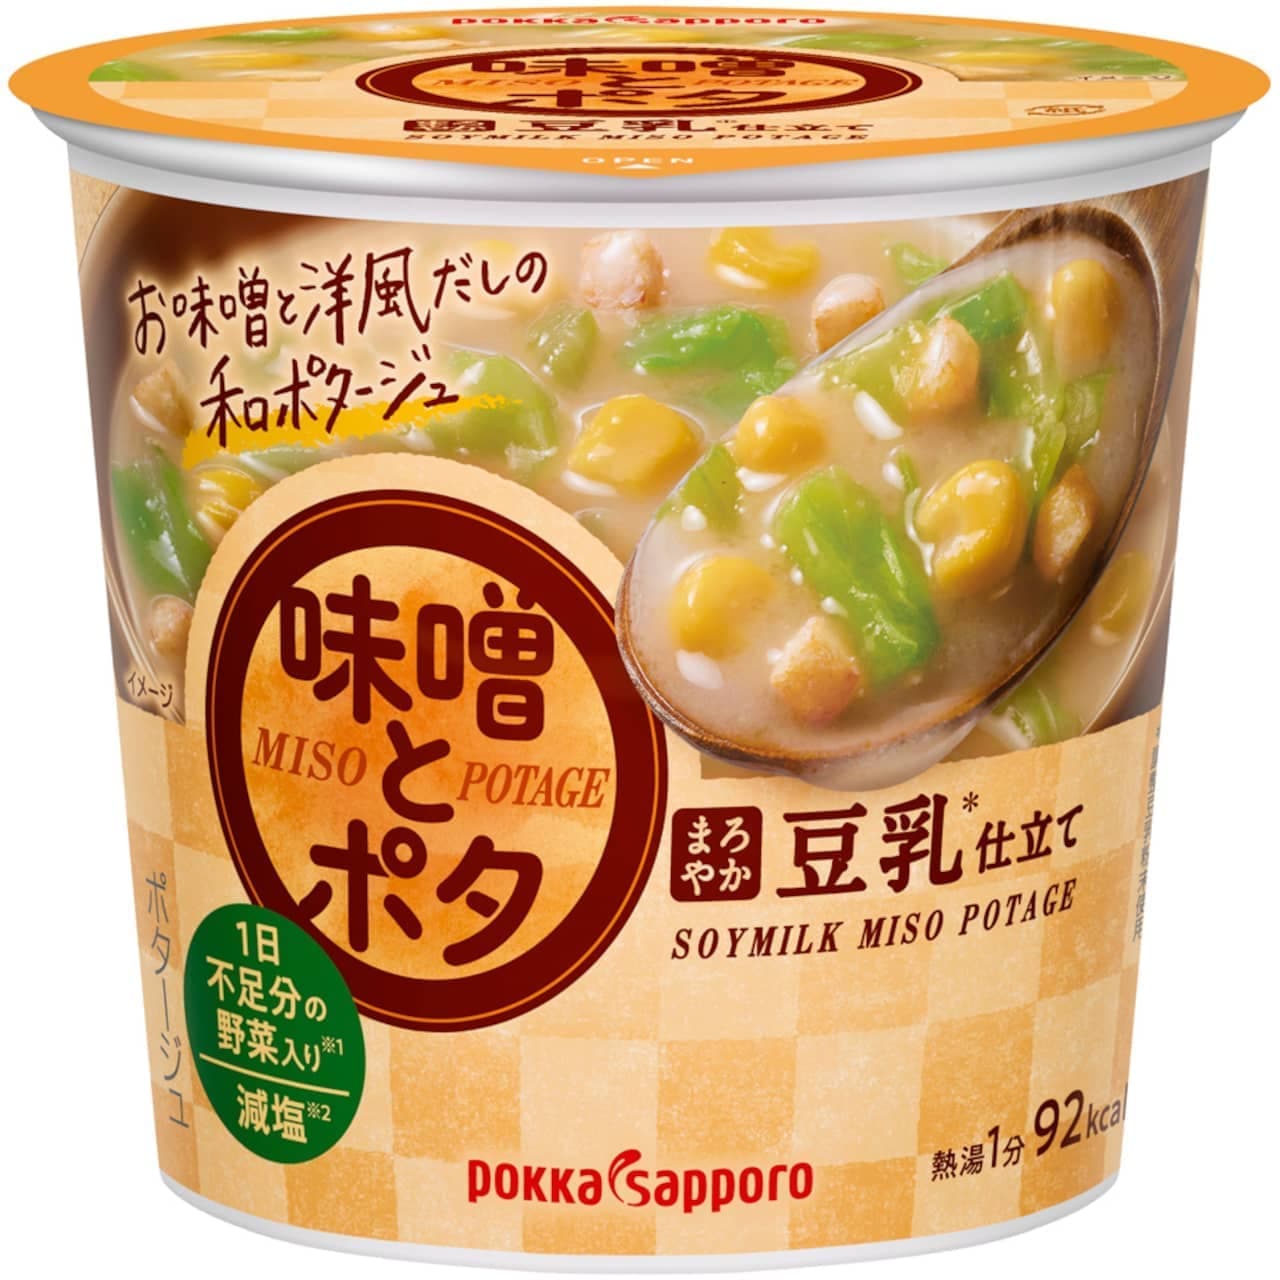 Cup soup "Miso and Pota" Japanese-style potage of miso and Western-style dashi